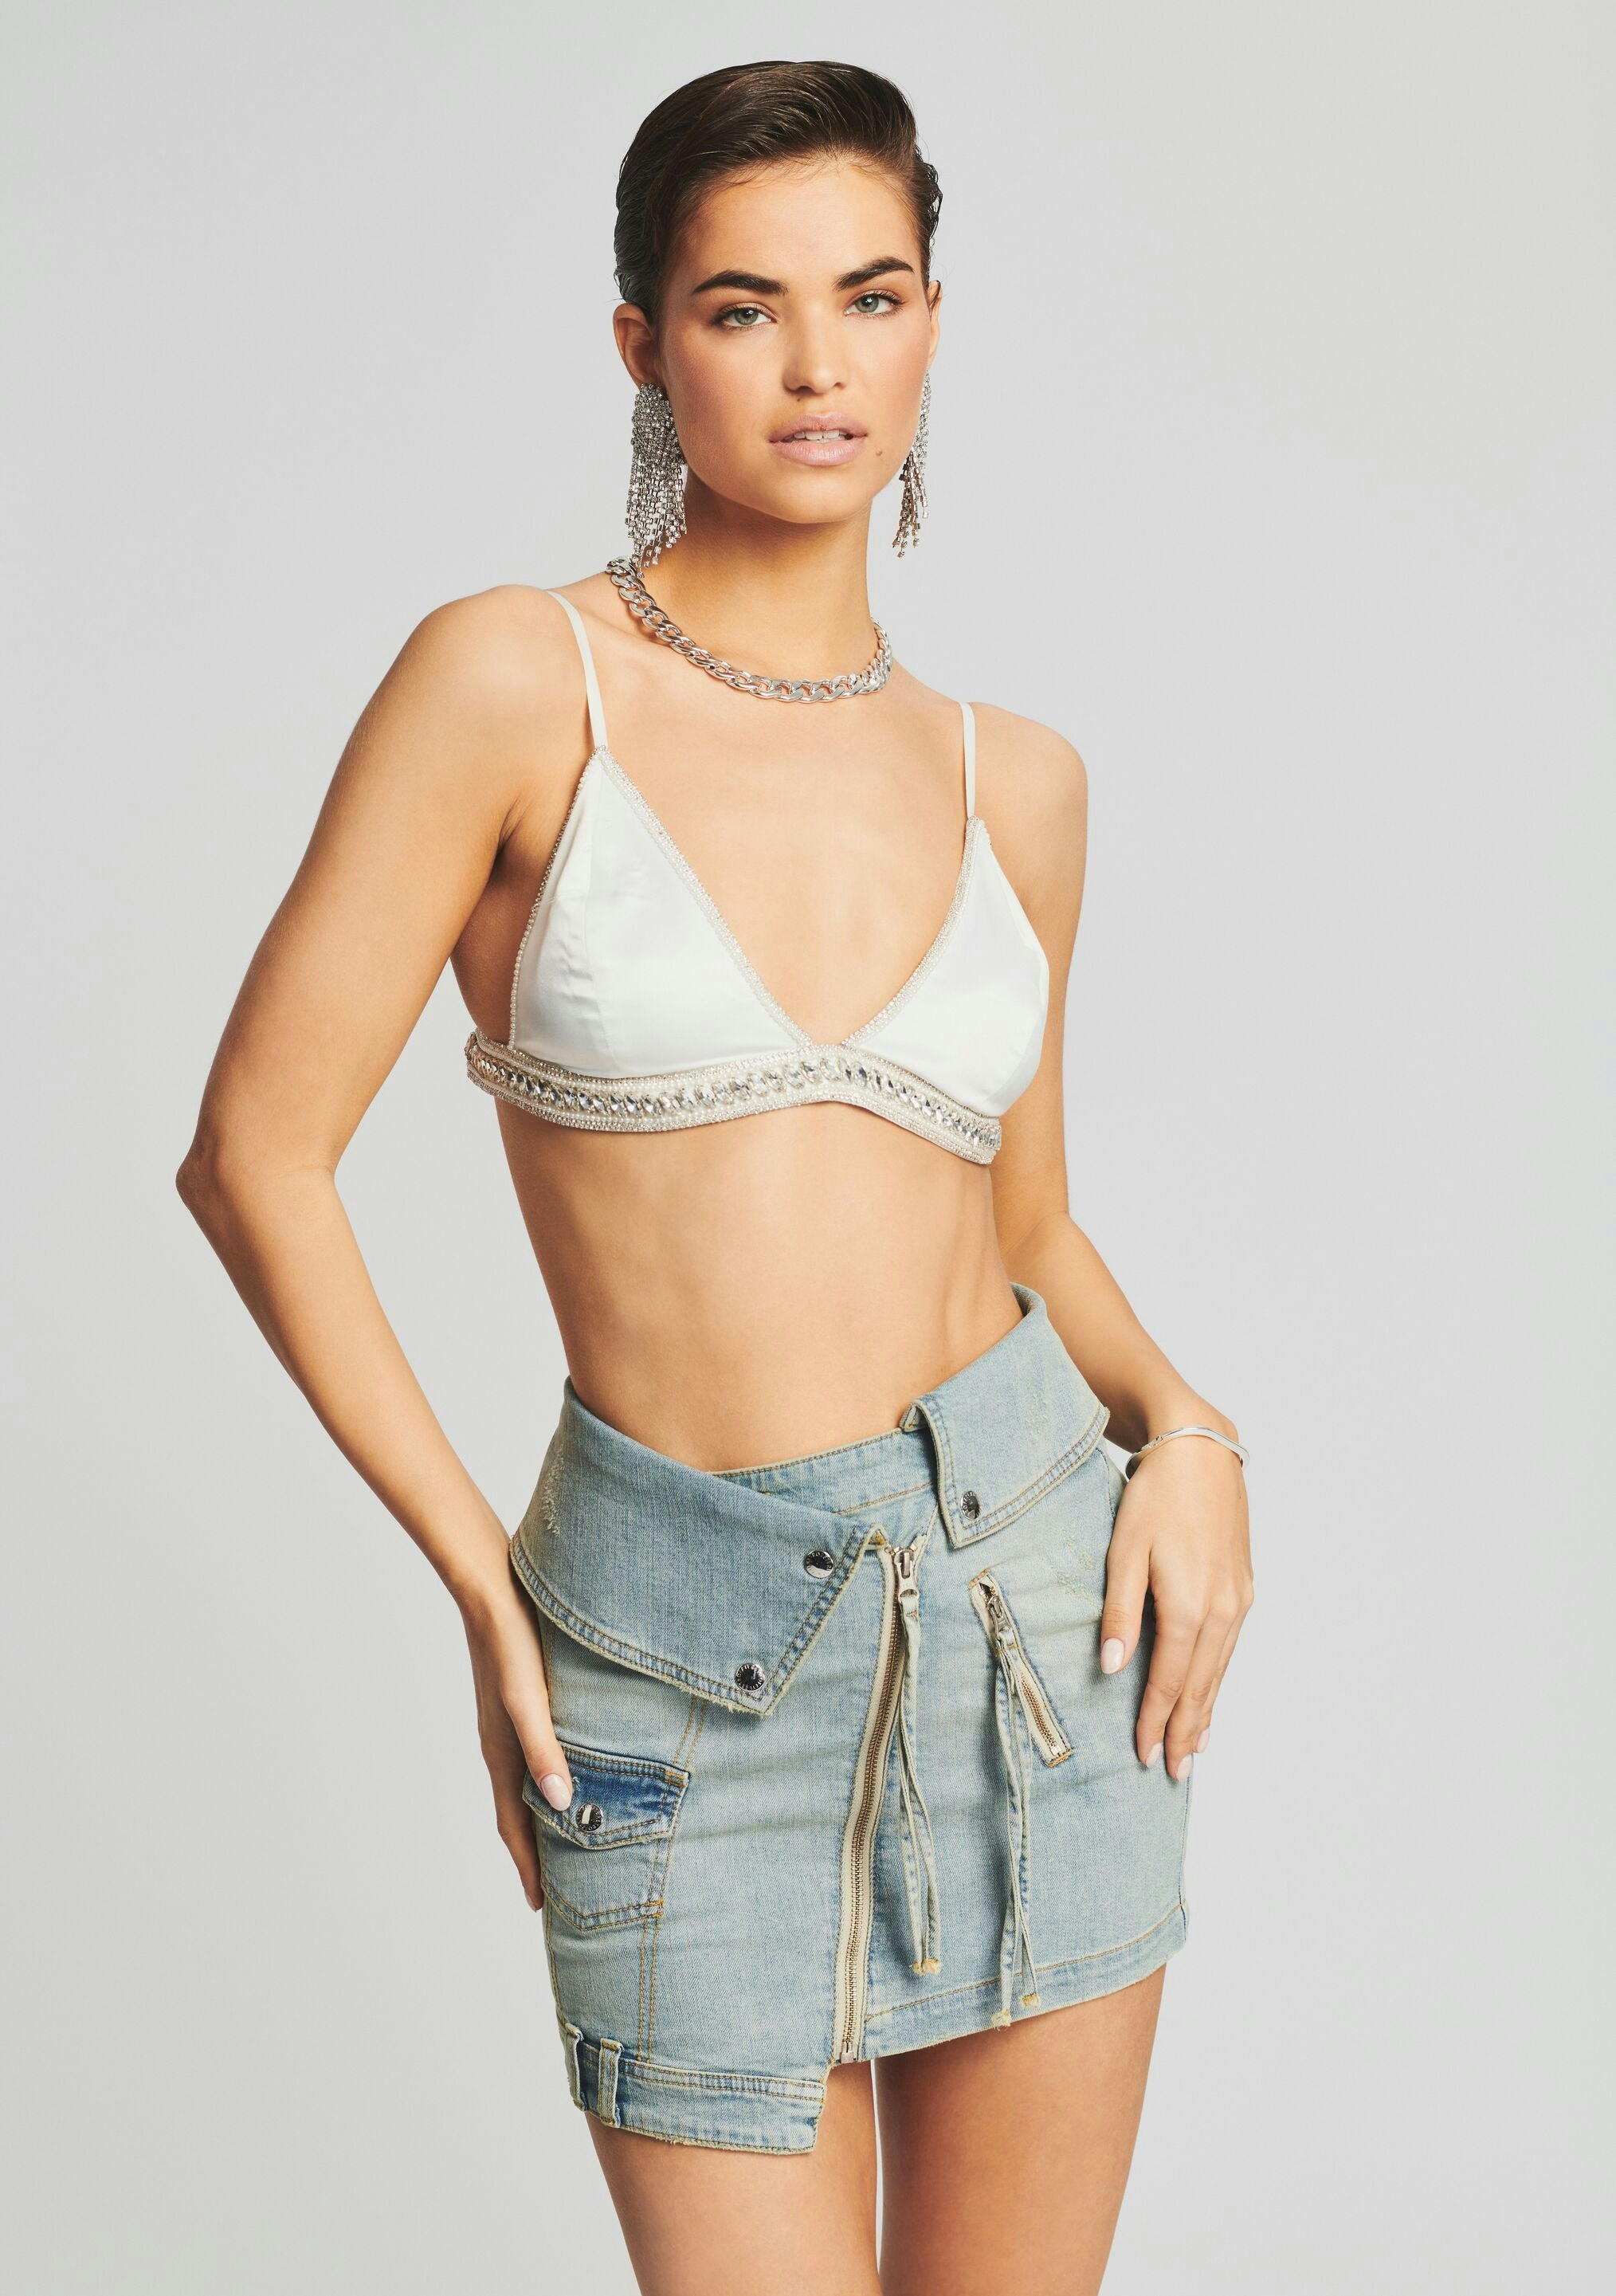 7 Going-Out Tops For Summer, From Crystal Bras To Corsets